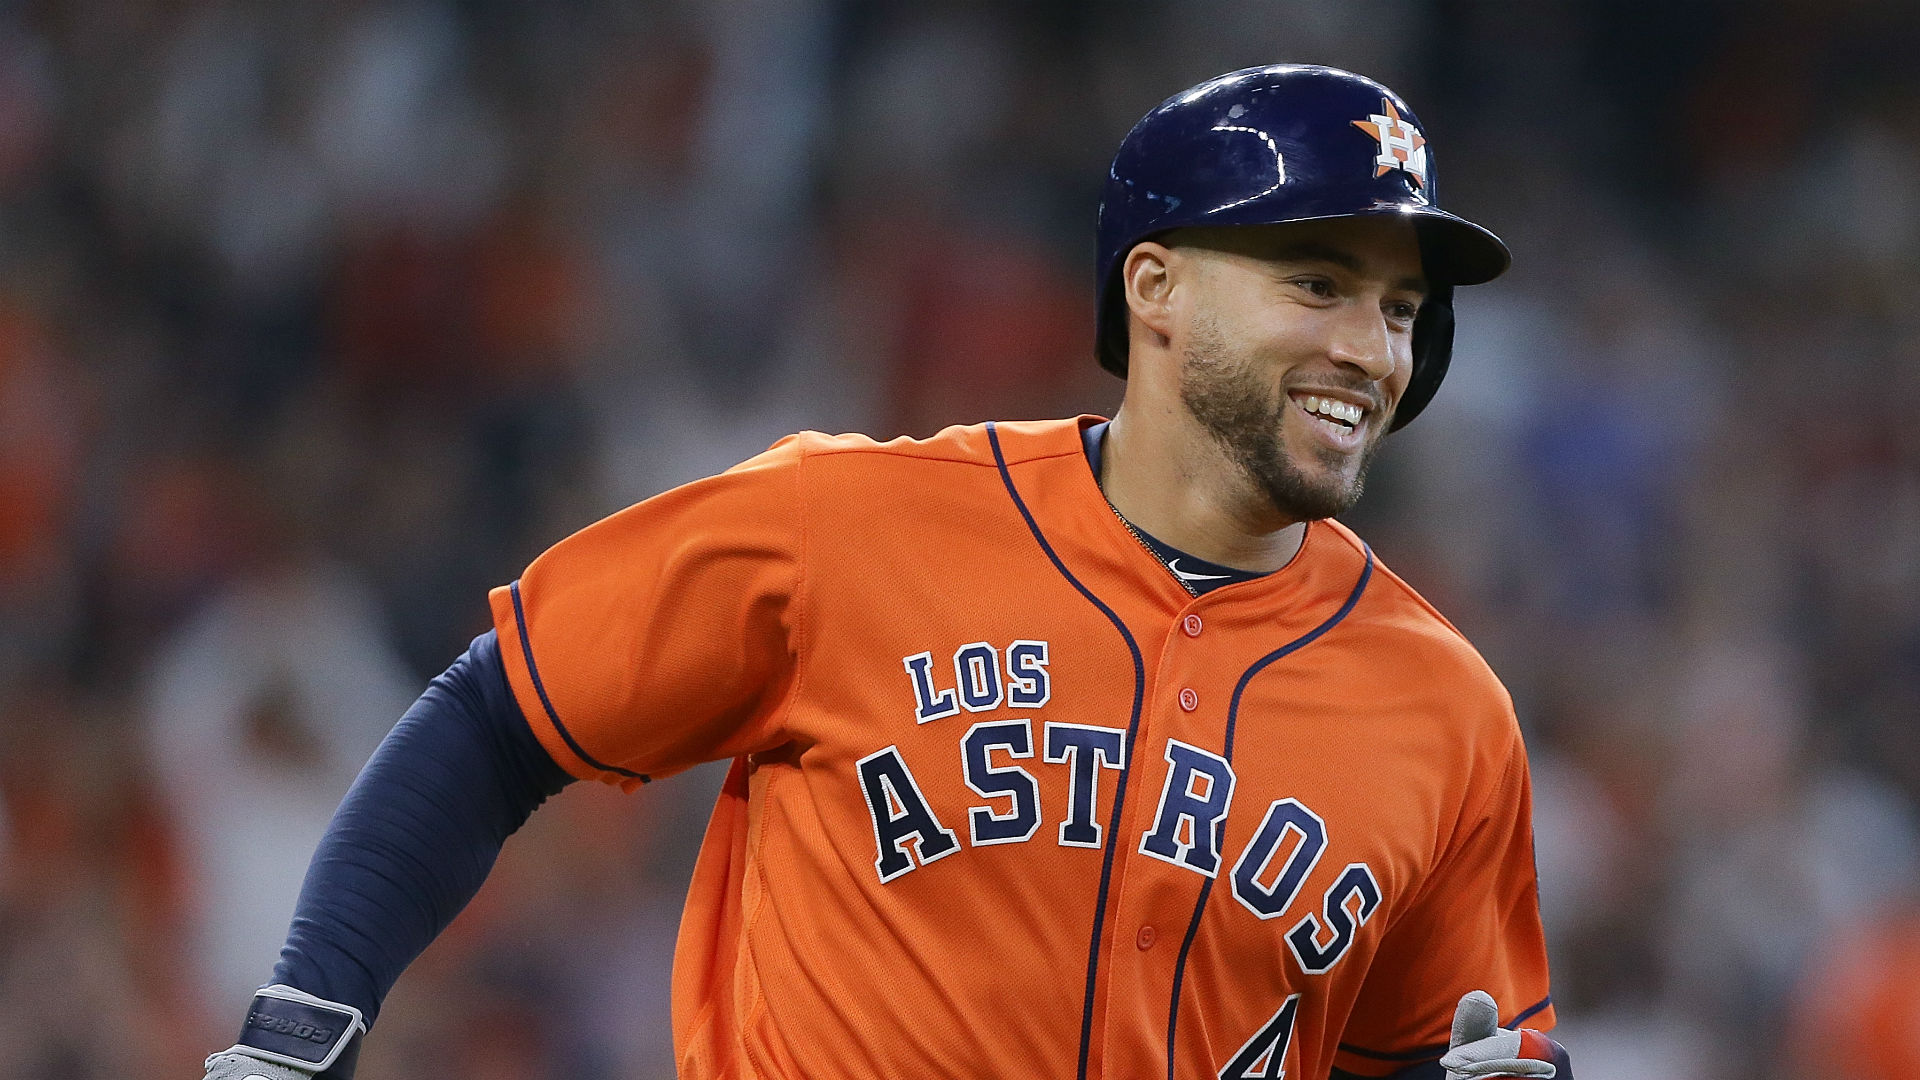 George Springer hit three home runs in four innings and added four RBIs.